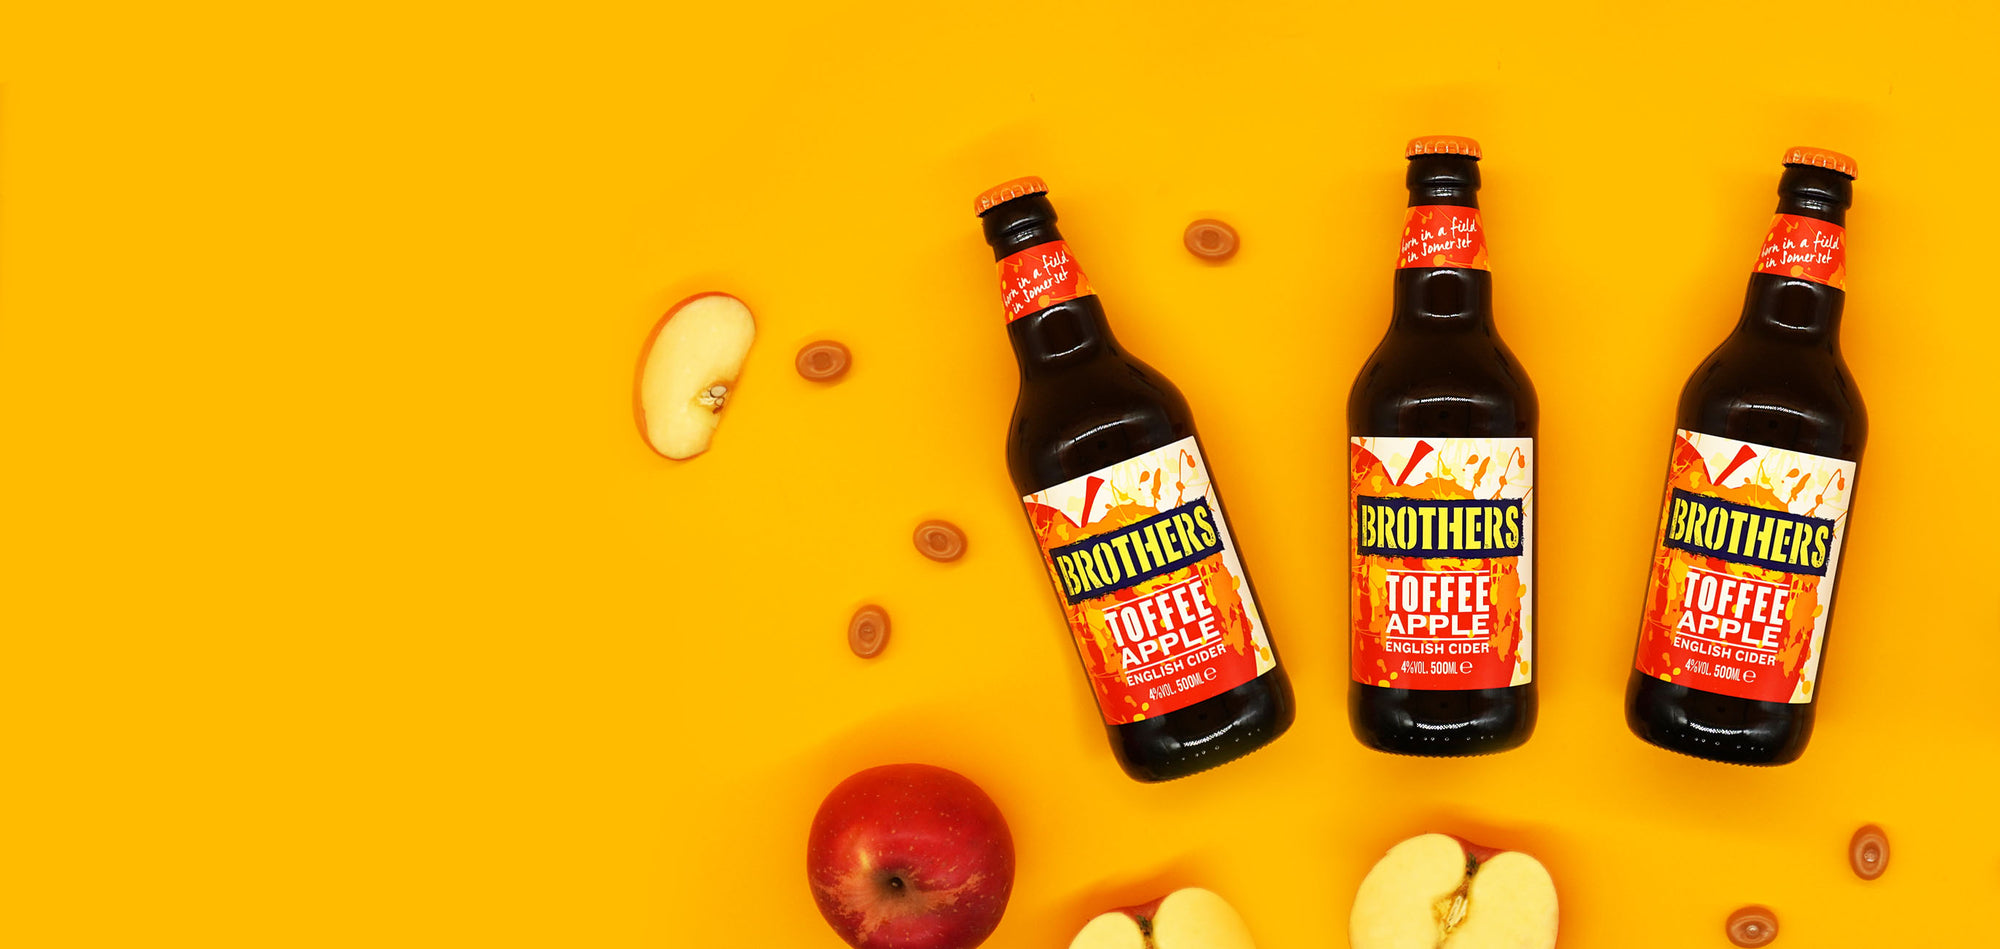 Brothers Toffee Apple English Cider